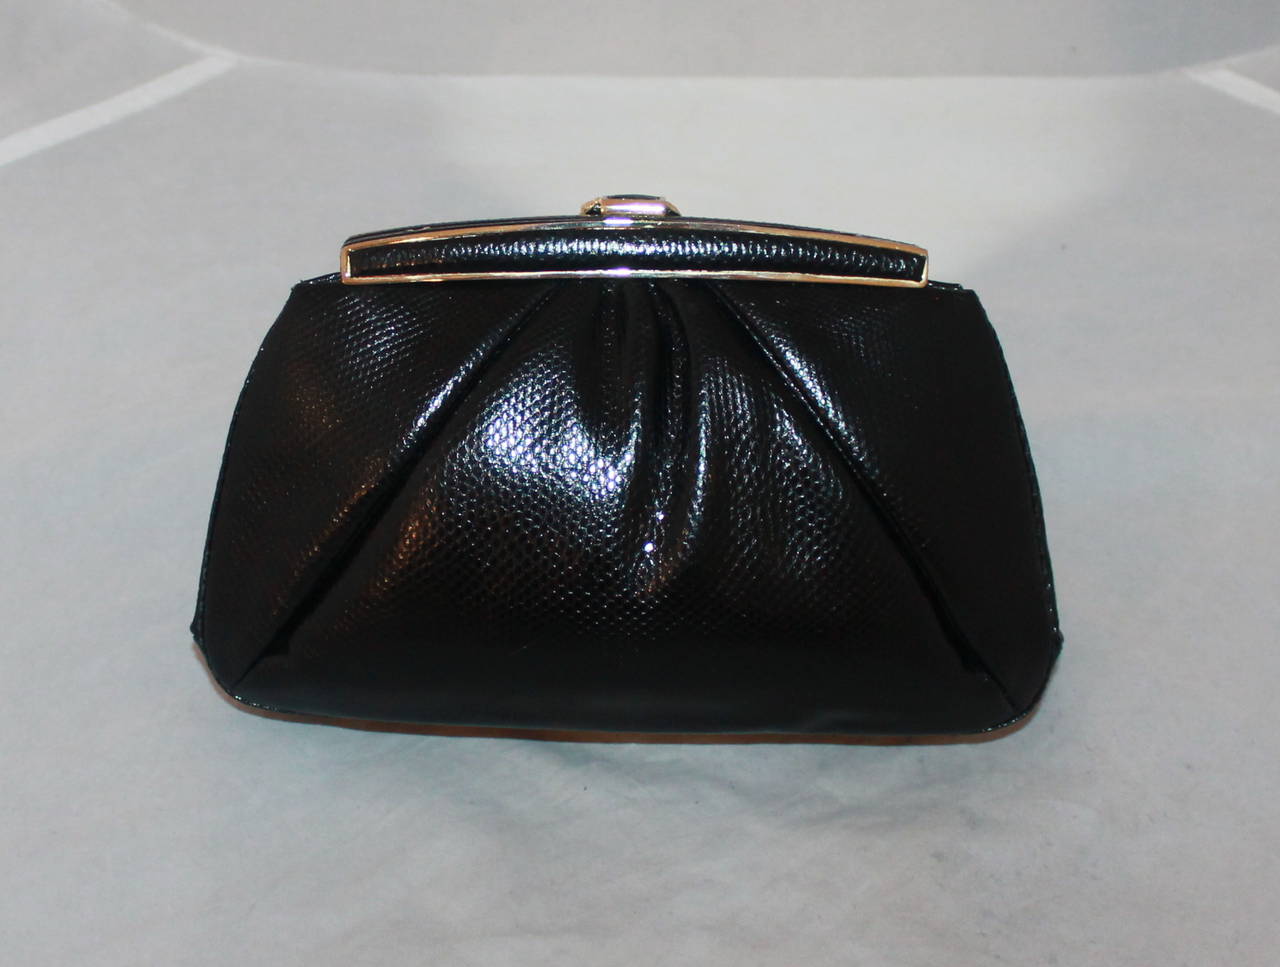 Judith Leiber 1980's Vintage Black Lizard Evening Bag with Gold Knot Clasp. This bag is in excellent condition and comes with a coin purse, compact, comb, compact case, and duster. 

Measurements:
Length- 5.5